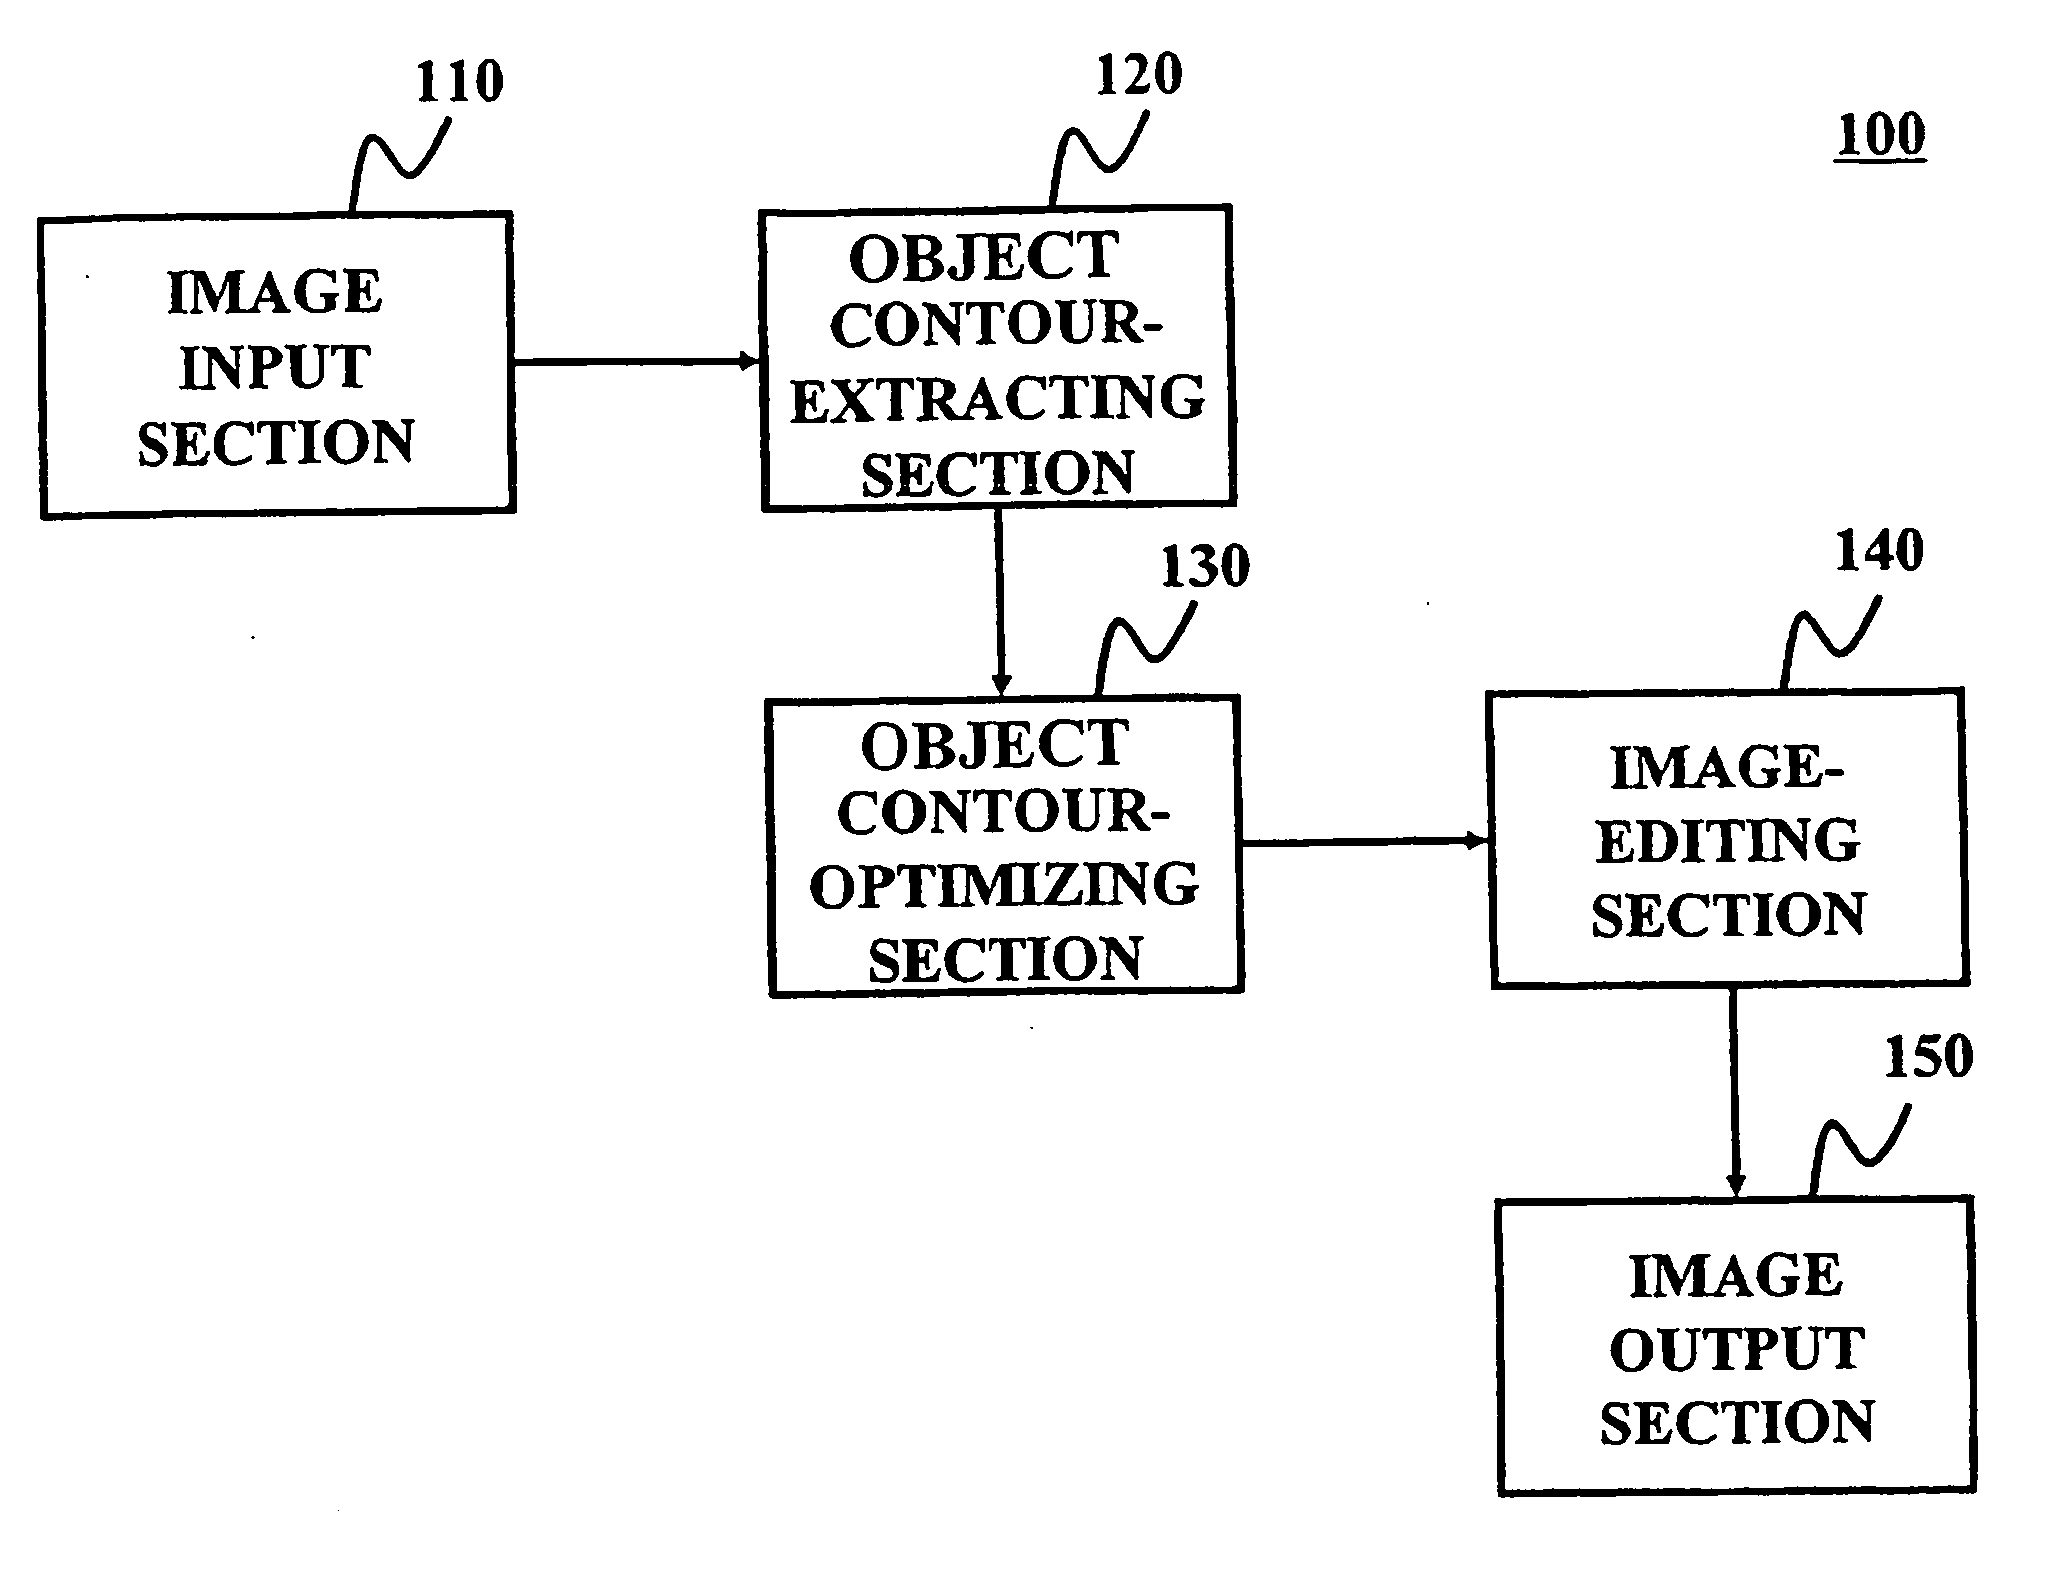 Method and apparatus for editing images using contour-extracting algorithm